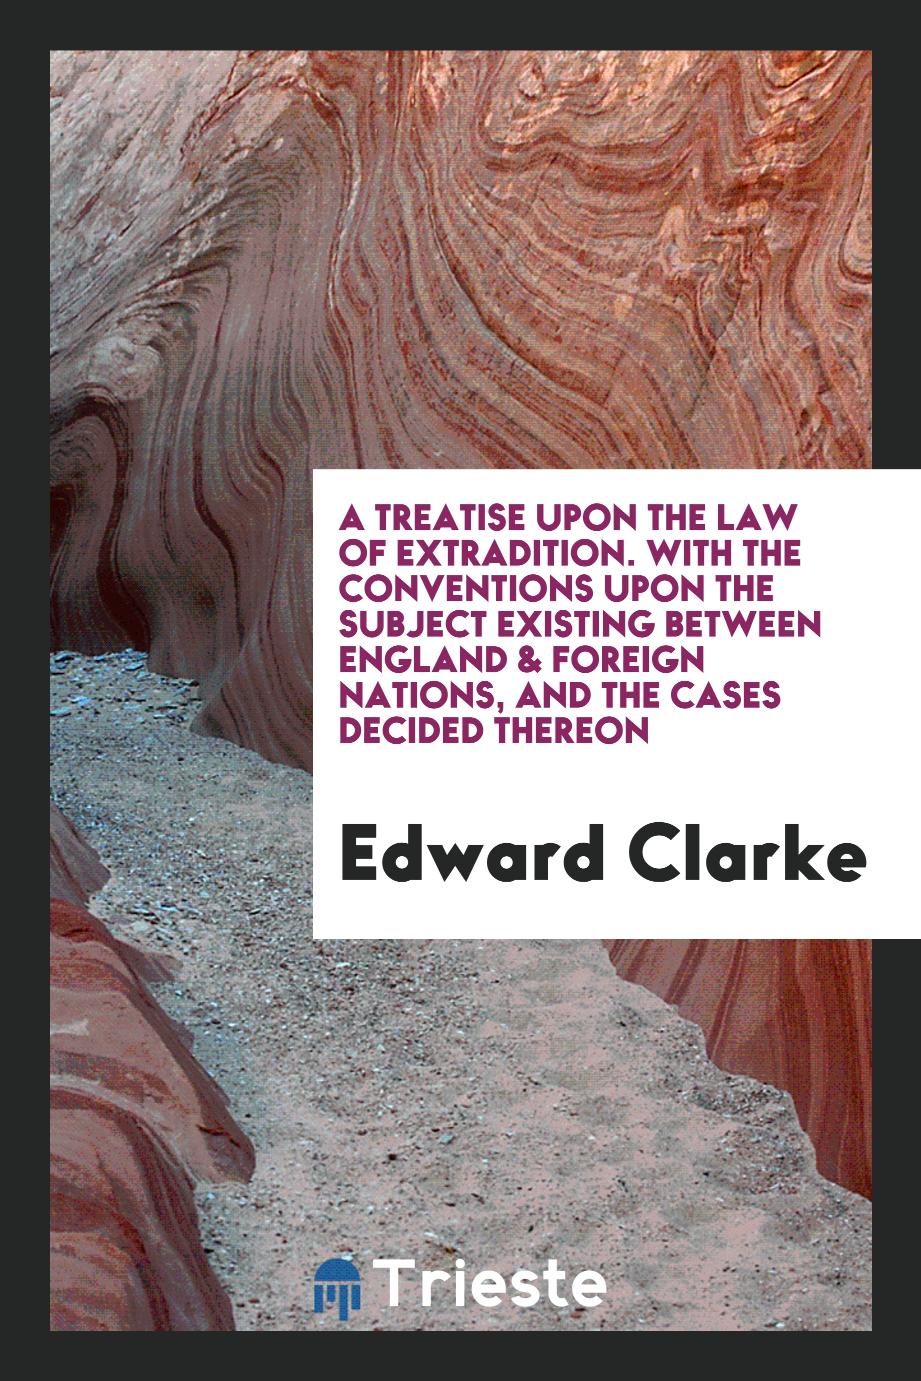 A Treatise upon the Law of Extradition. With the Conventions upon the Subject Existing Between England & Foreign Nations, and the Cases Decided Thereon